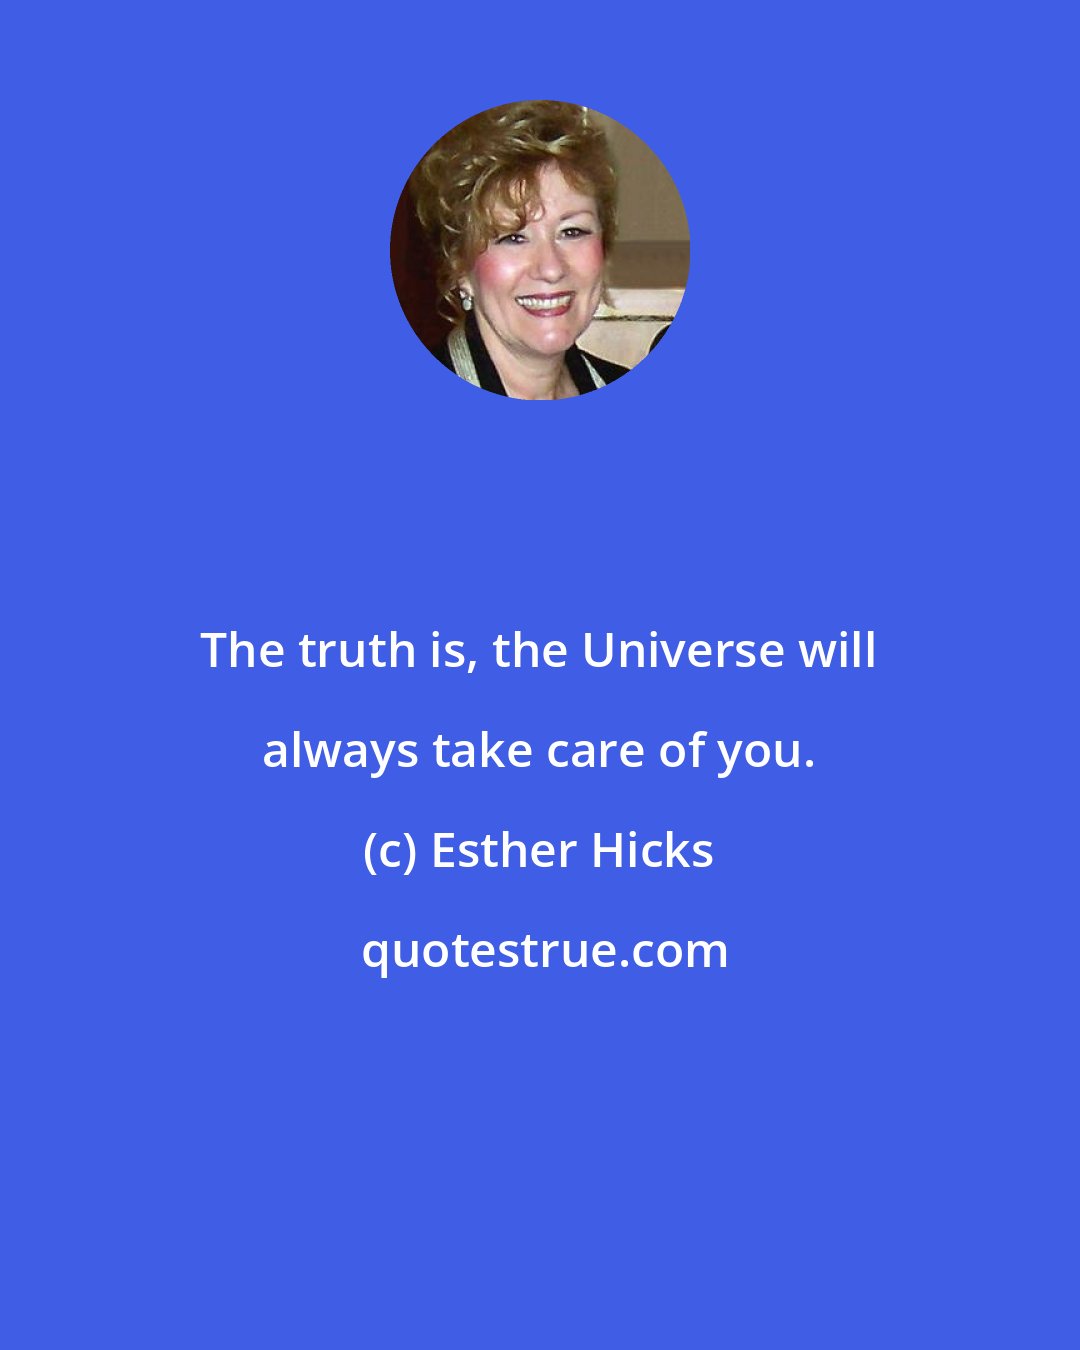 Esther Hicks: The truth is, the Universe will always take care of you.